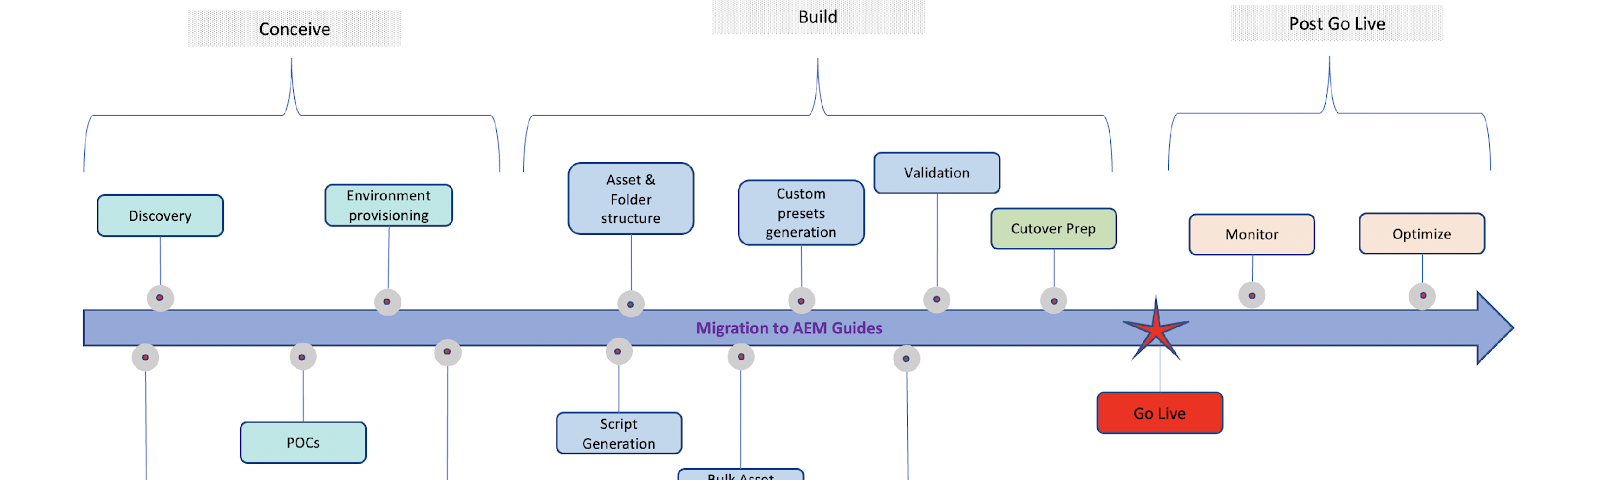 Migration journey to AEM Guides